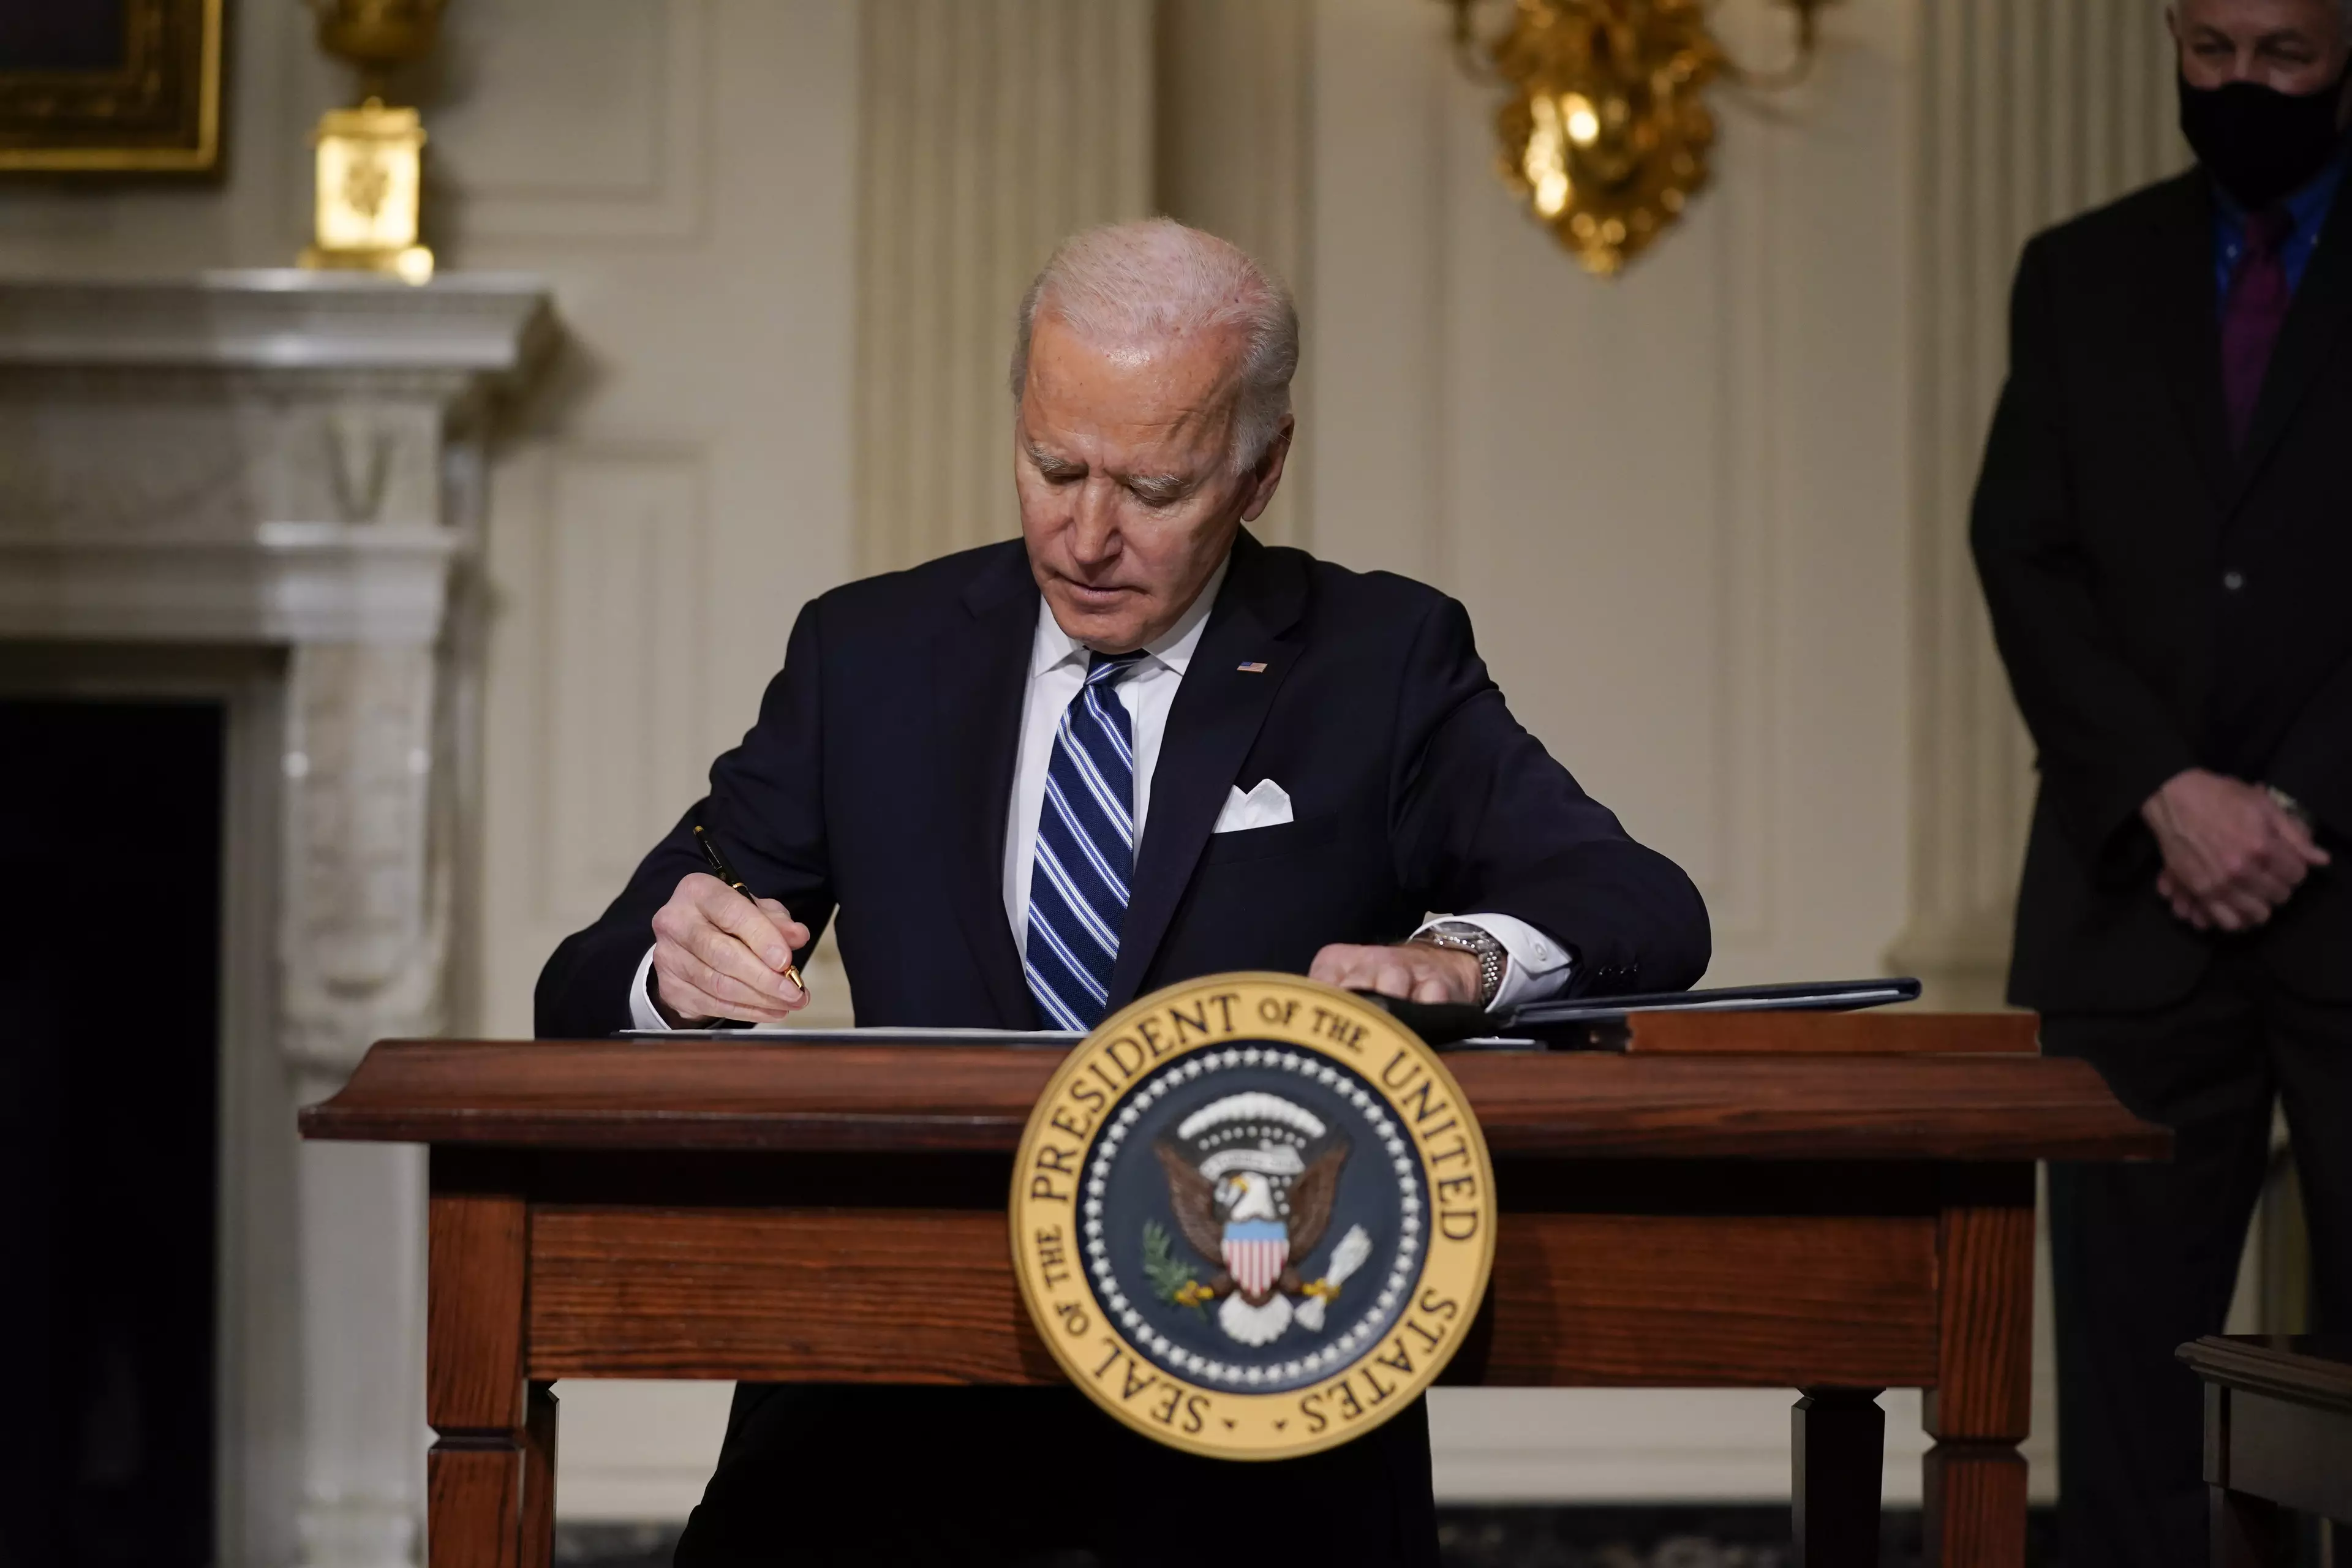 Biden has signed a number of executive orders since taking office.